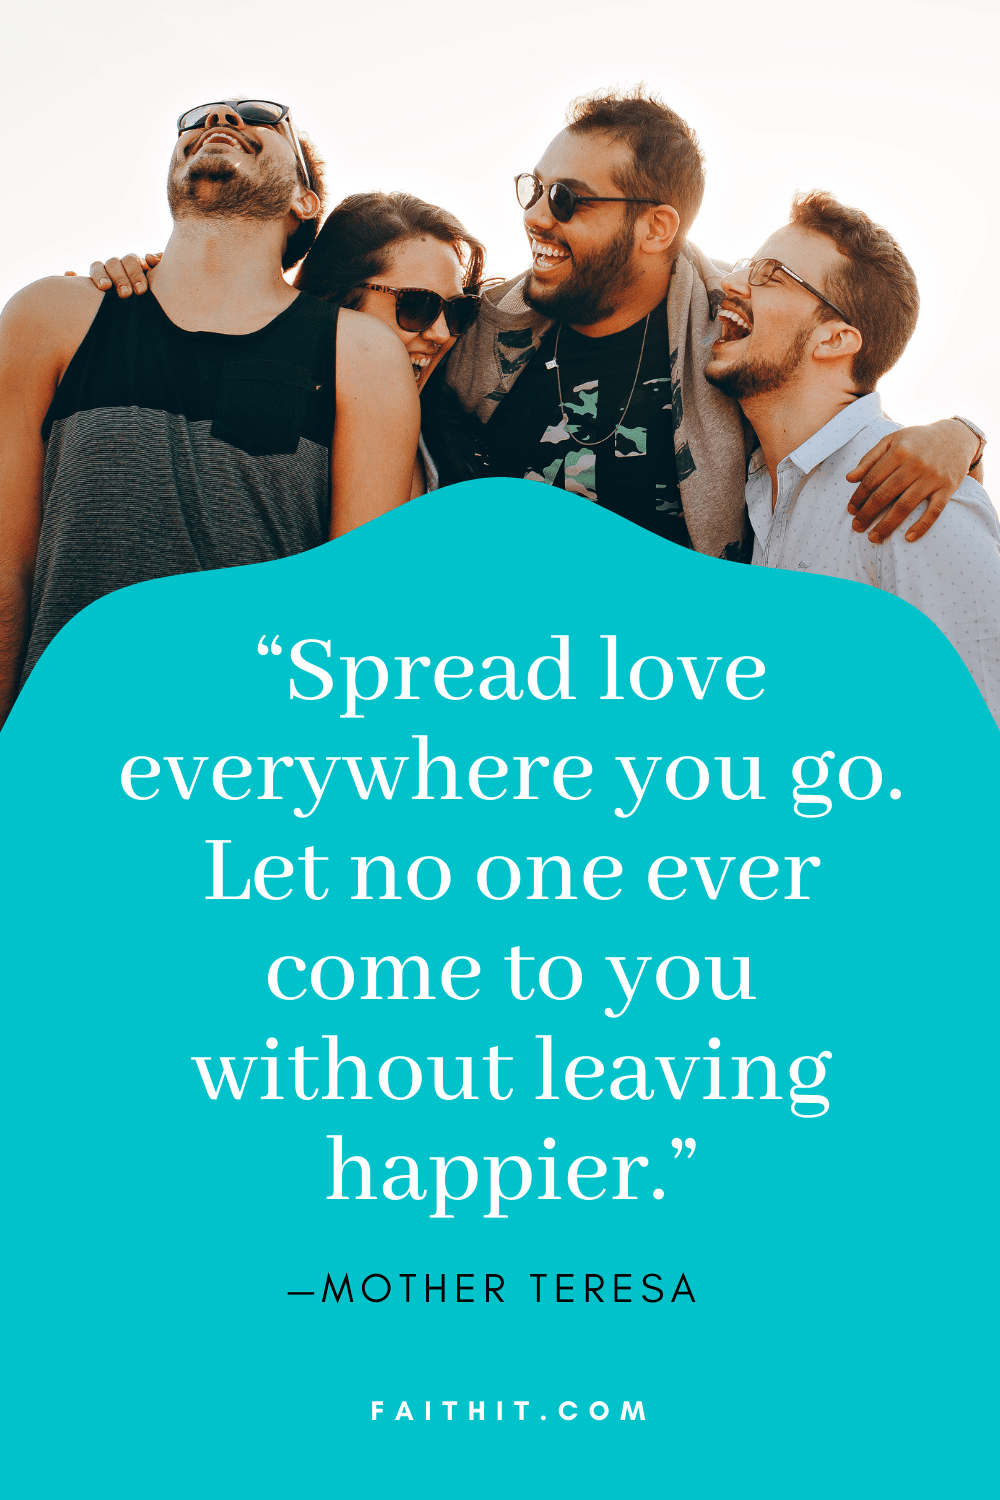 Spread Love Everywhere You Go, Inspirational Quotes